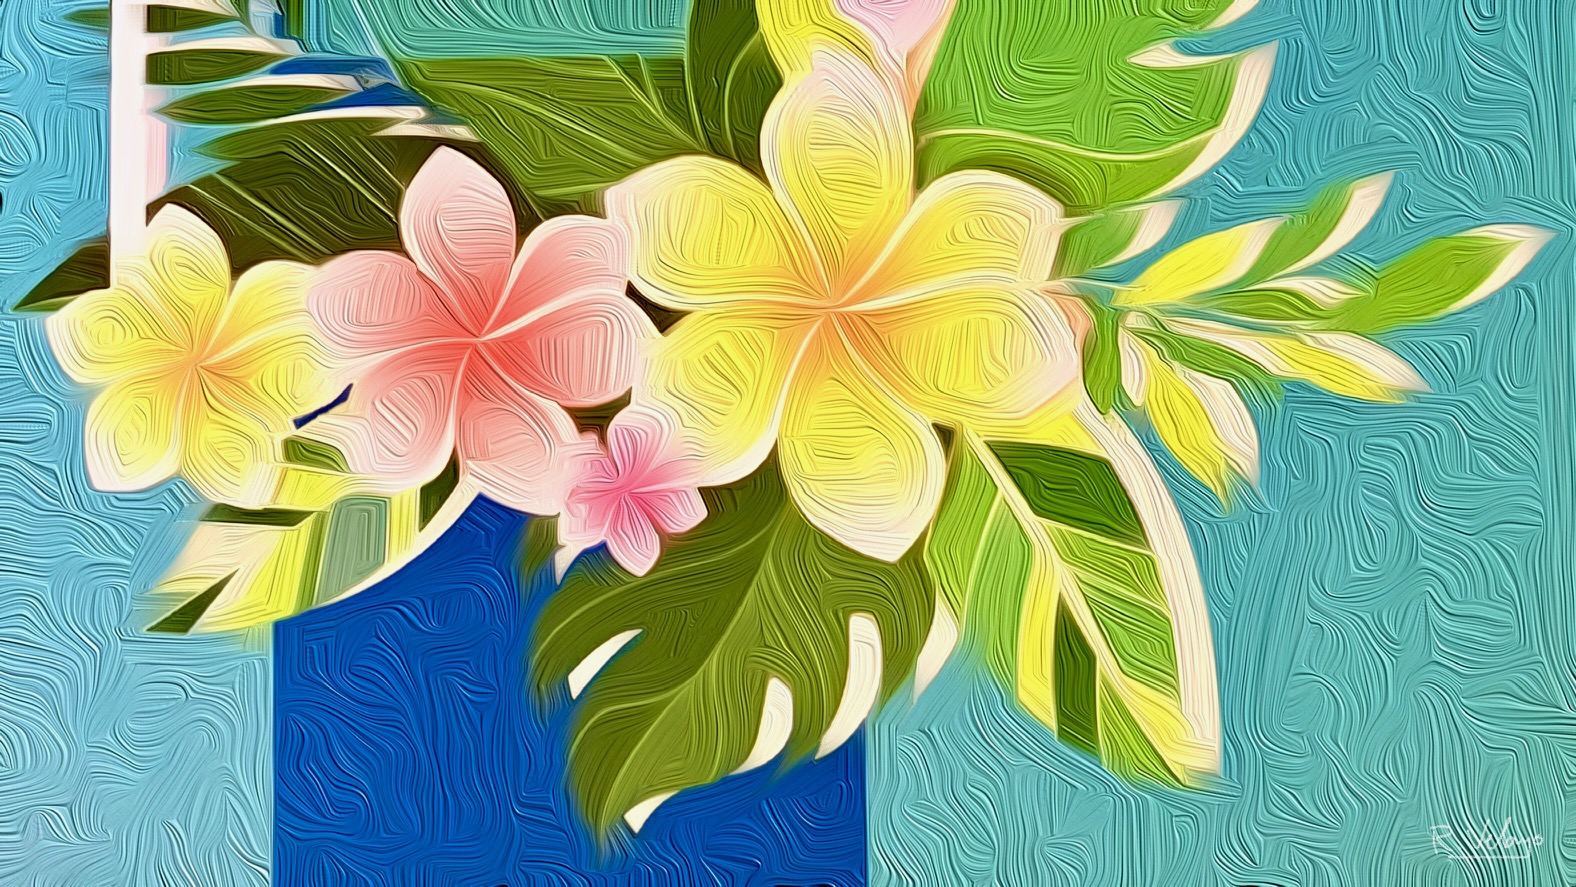 "TROPICAL FLOWERS 2" [Created: 7/27/2021]